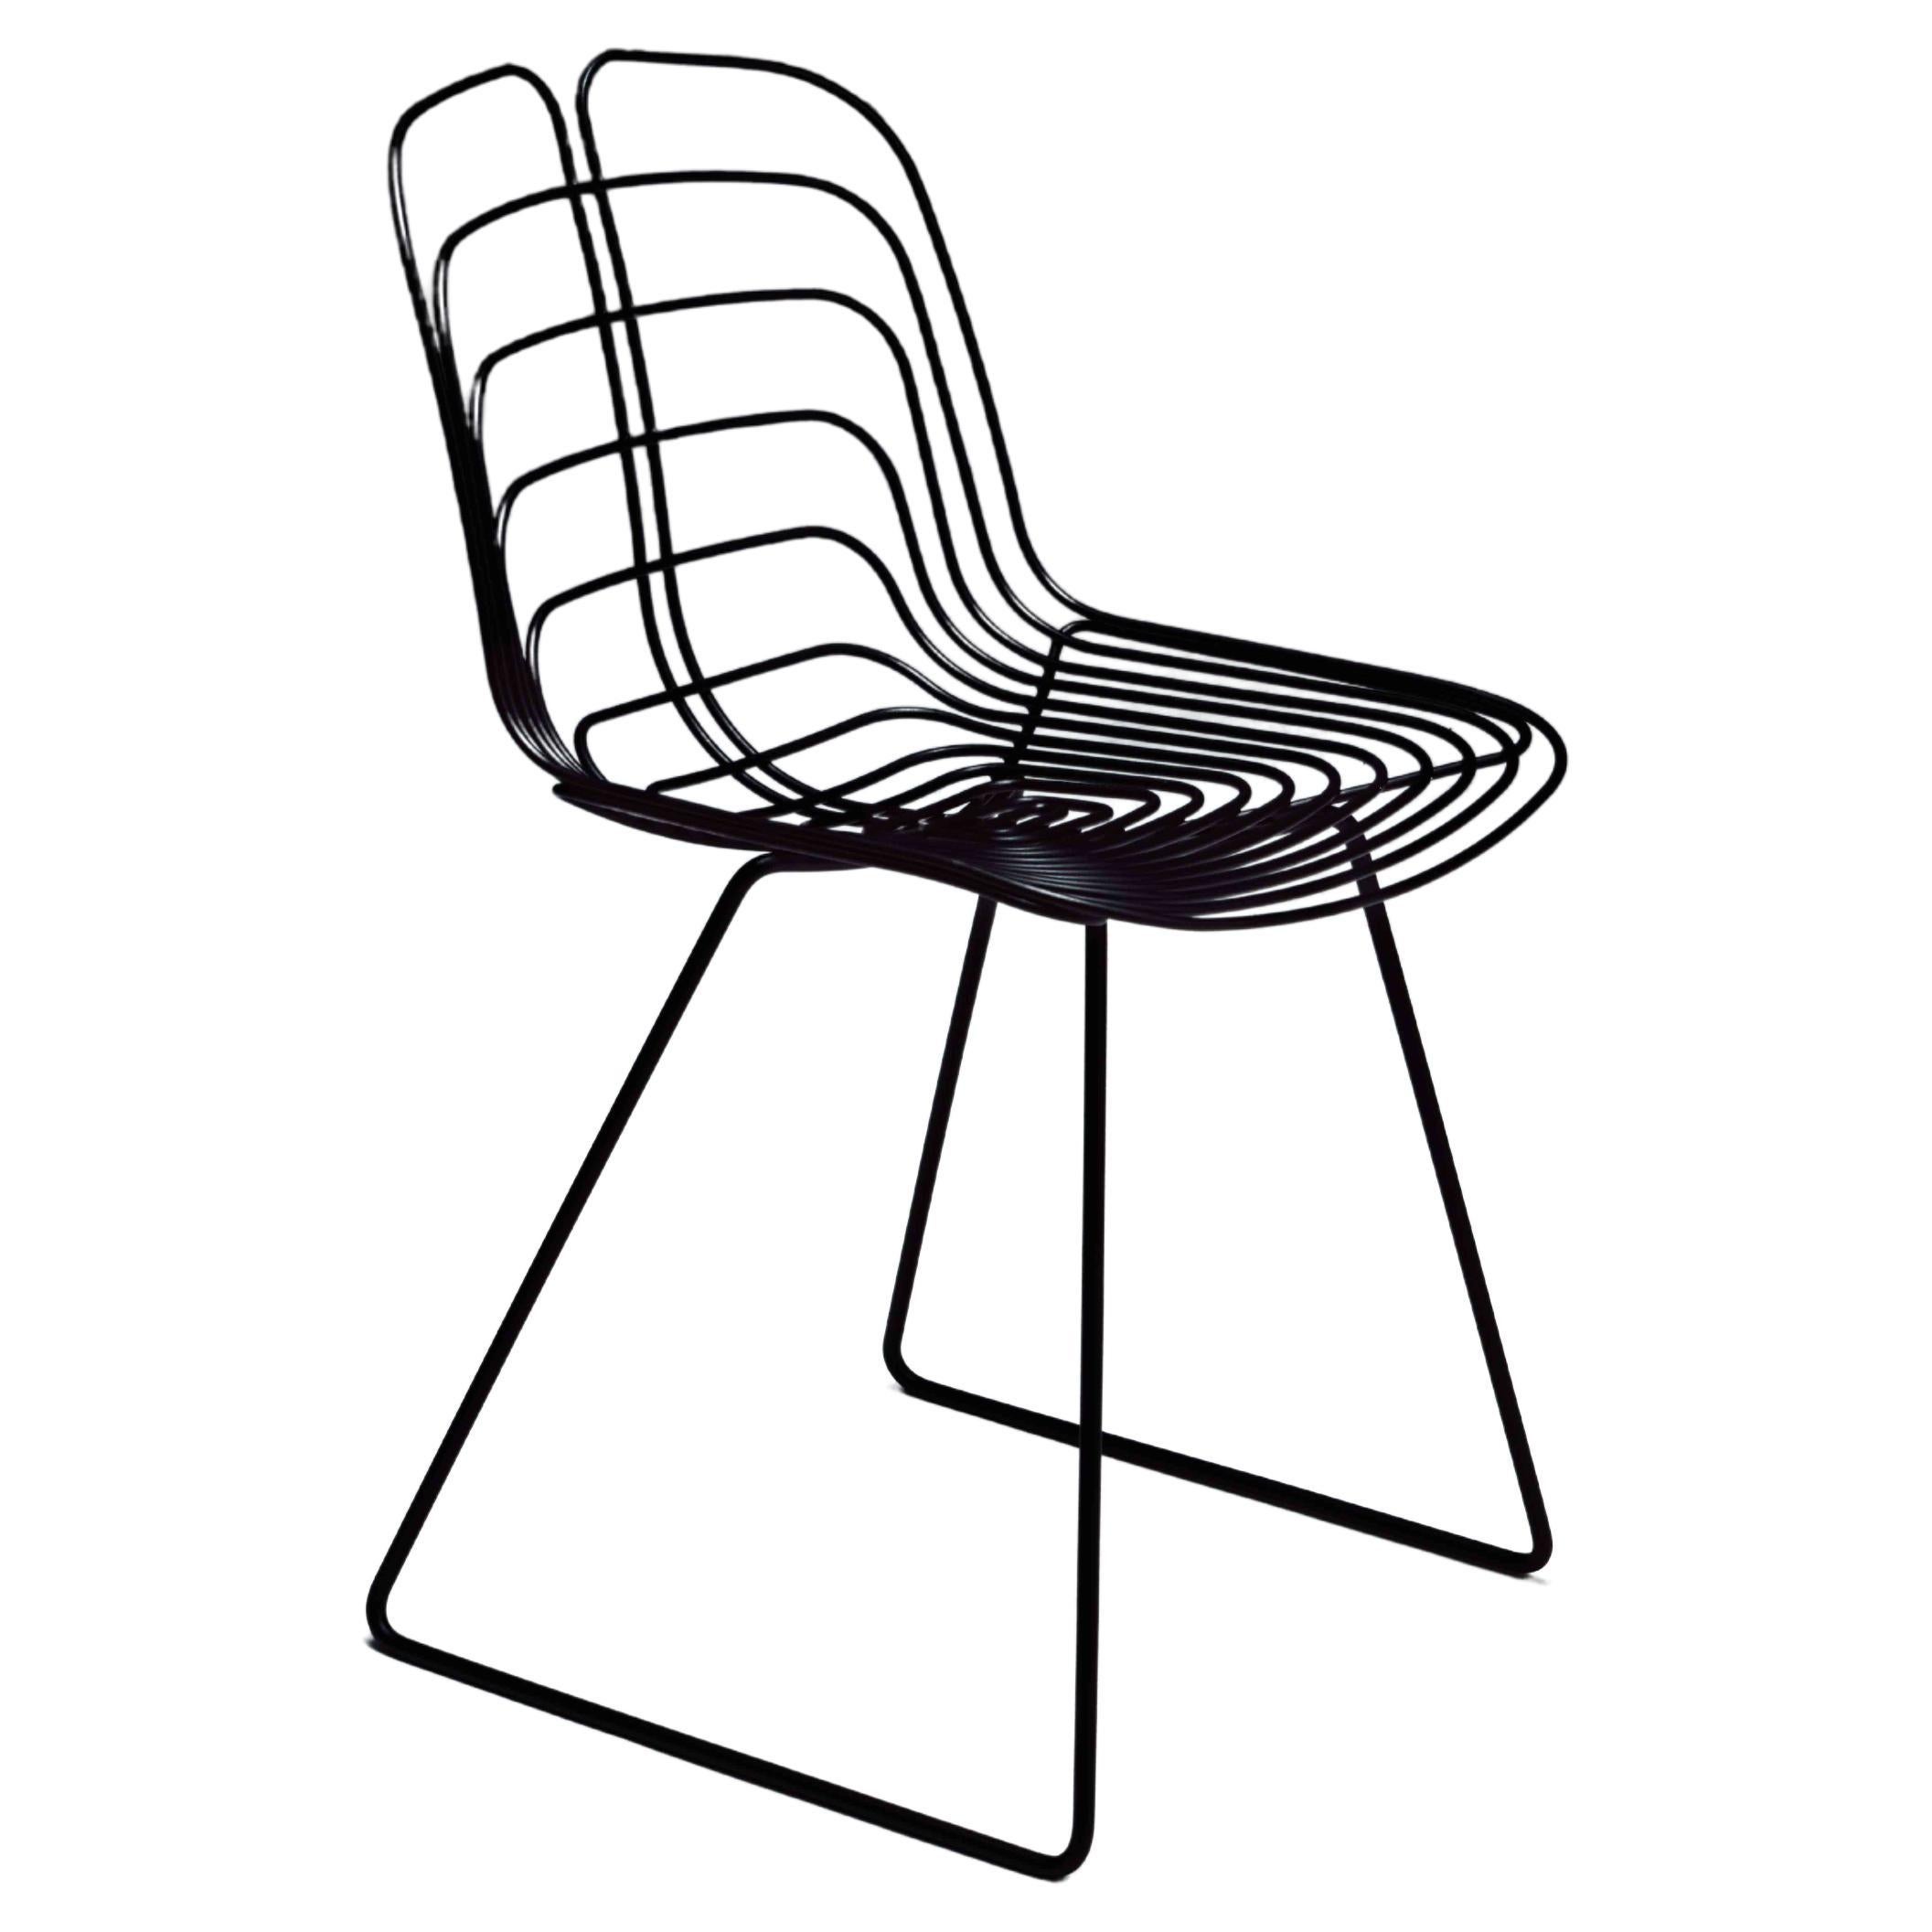 Wired Outdoor Chair by Michael Young